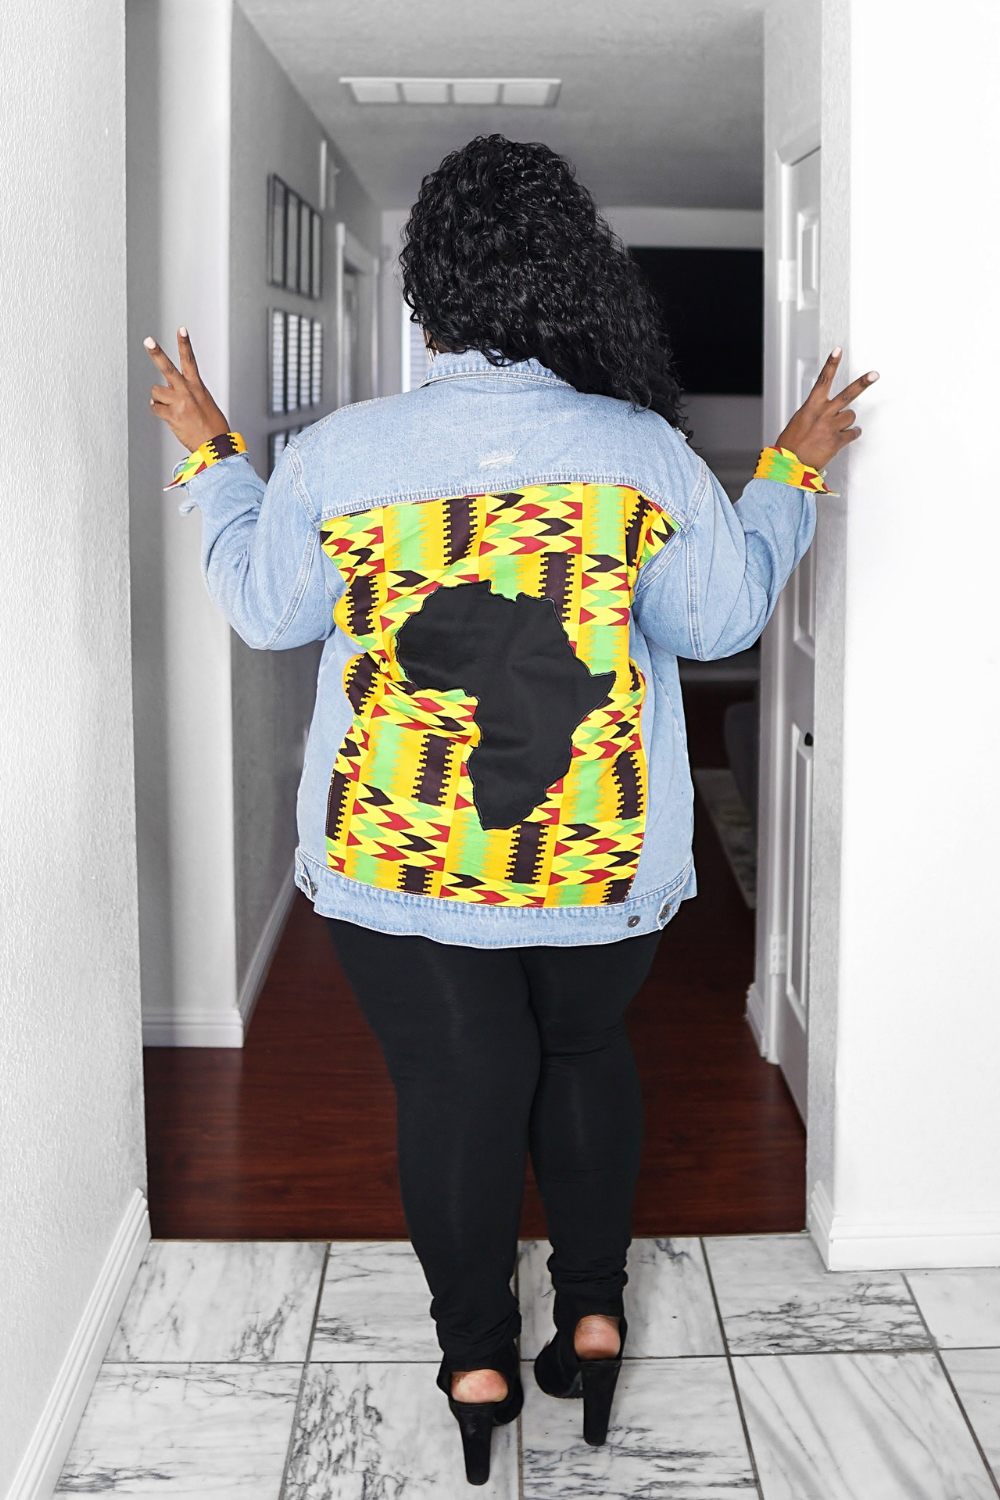 plus size blogger lacenleopard wearing an african print jacket